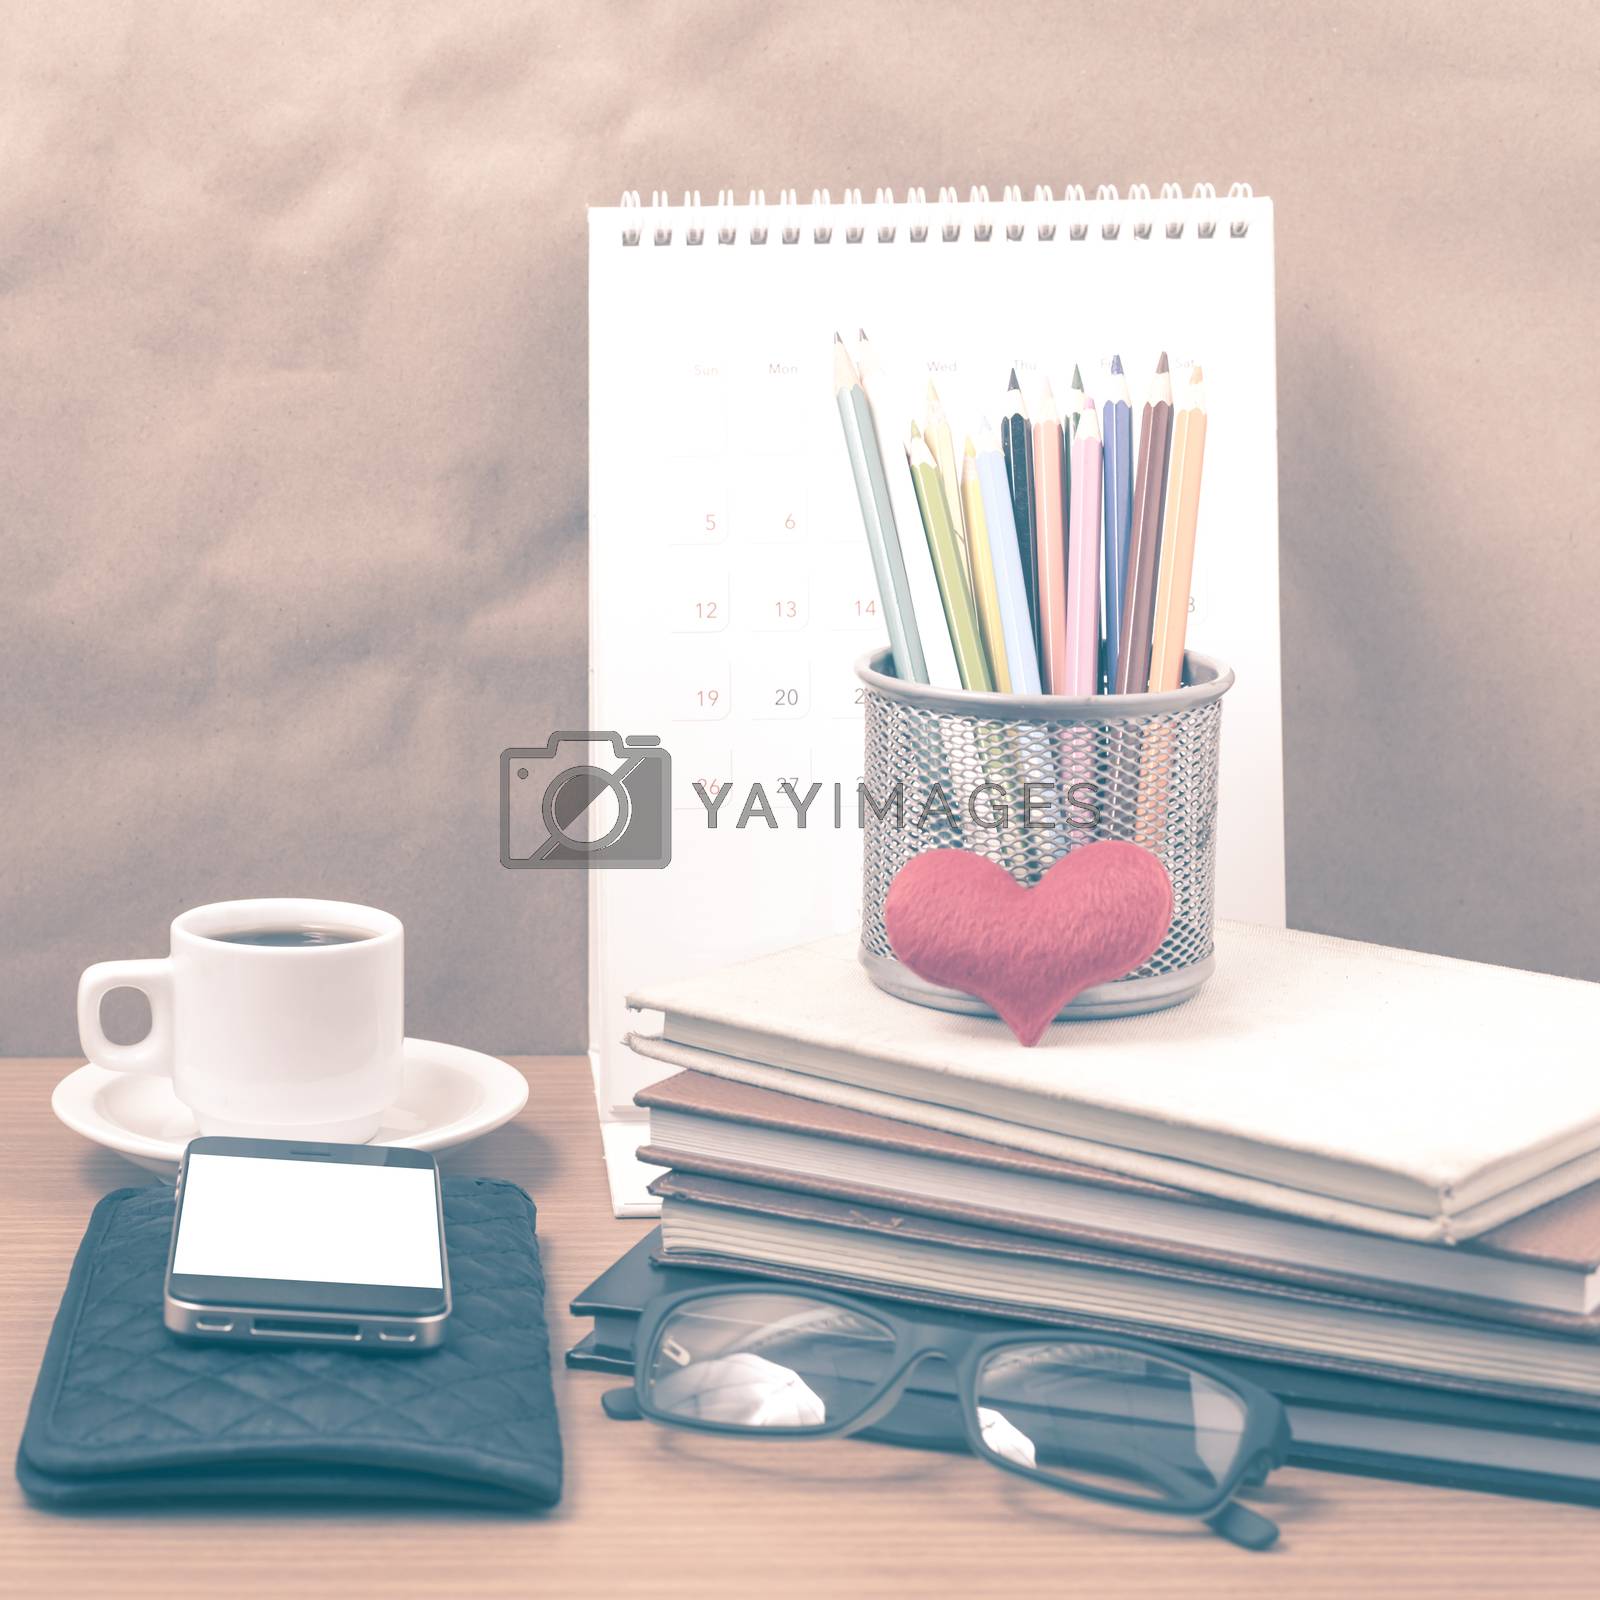 Royalty free image of office desk : coffee with phone,wallet,calendar,color pencil box by ammza12